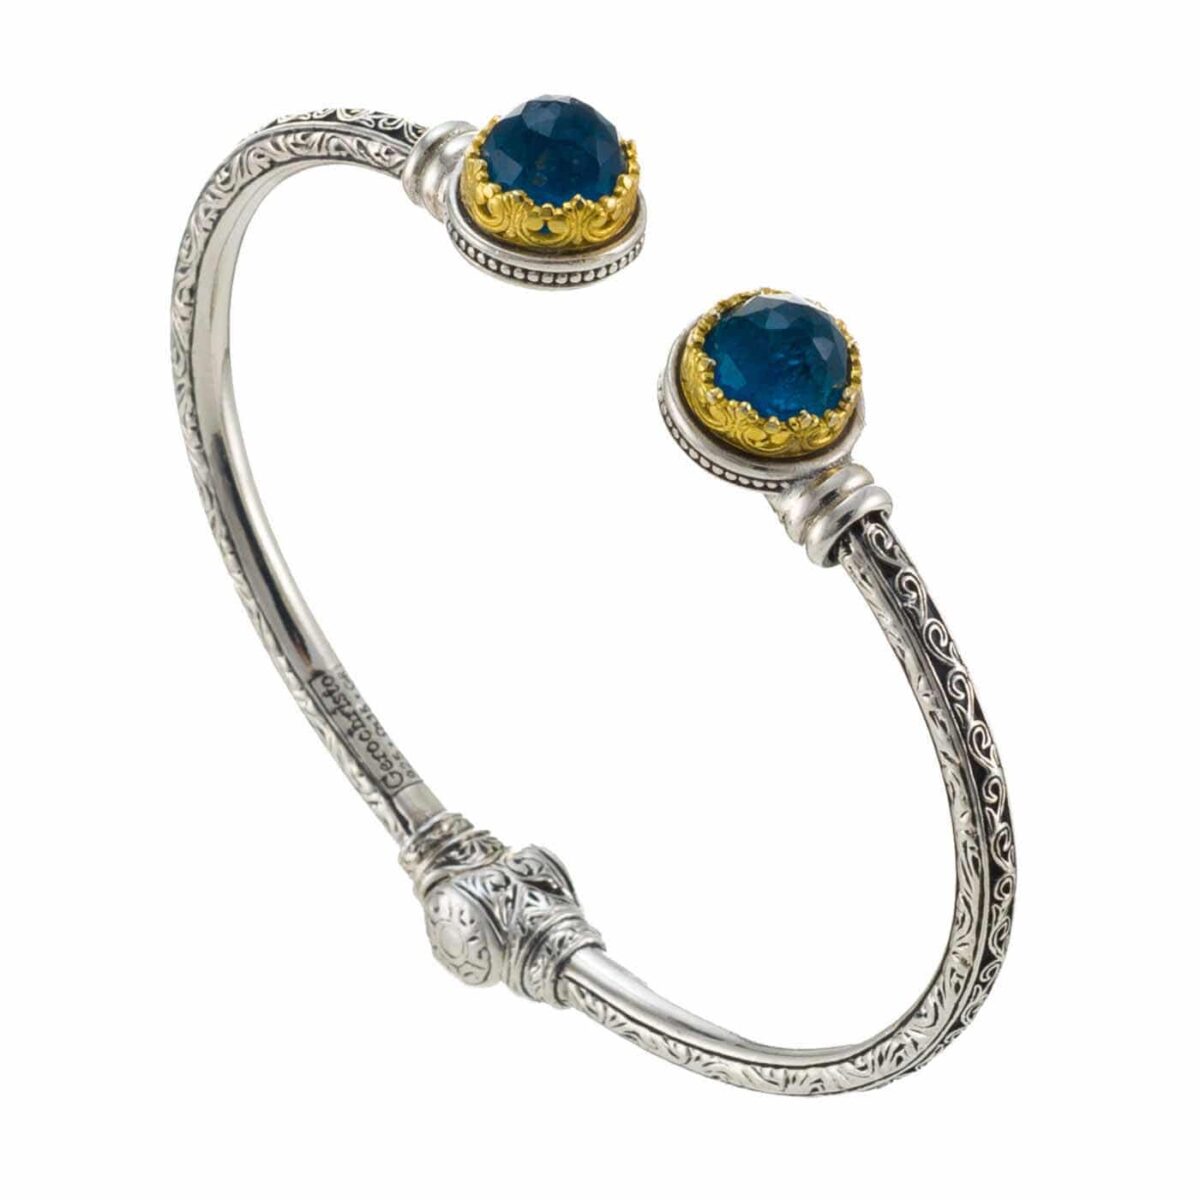 Bracelet in Sterling Silver with gold plated parts and doublet stones